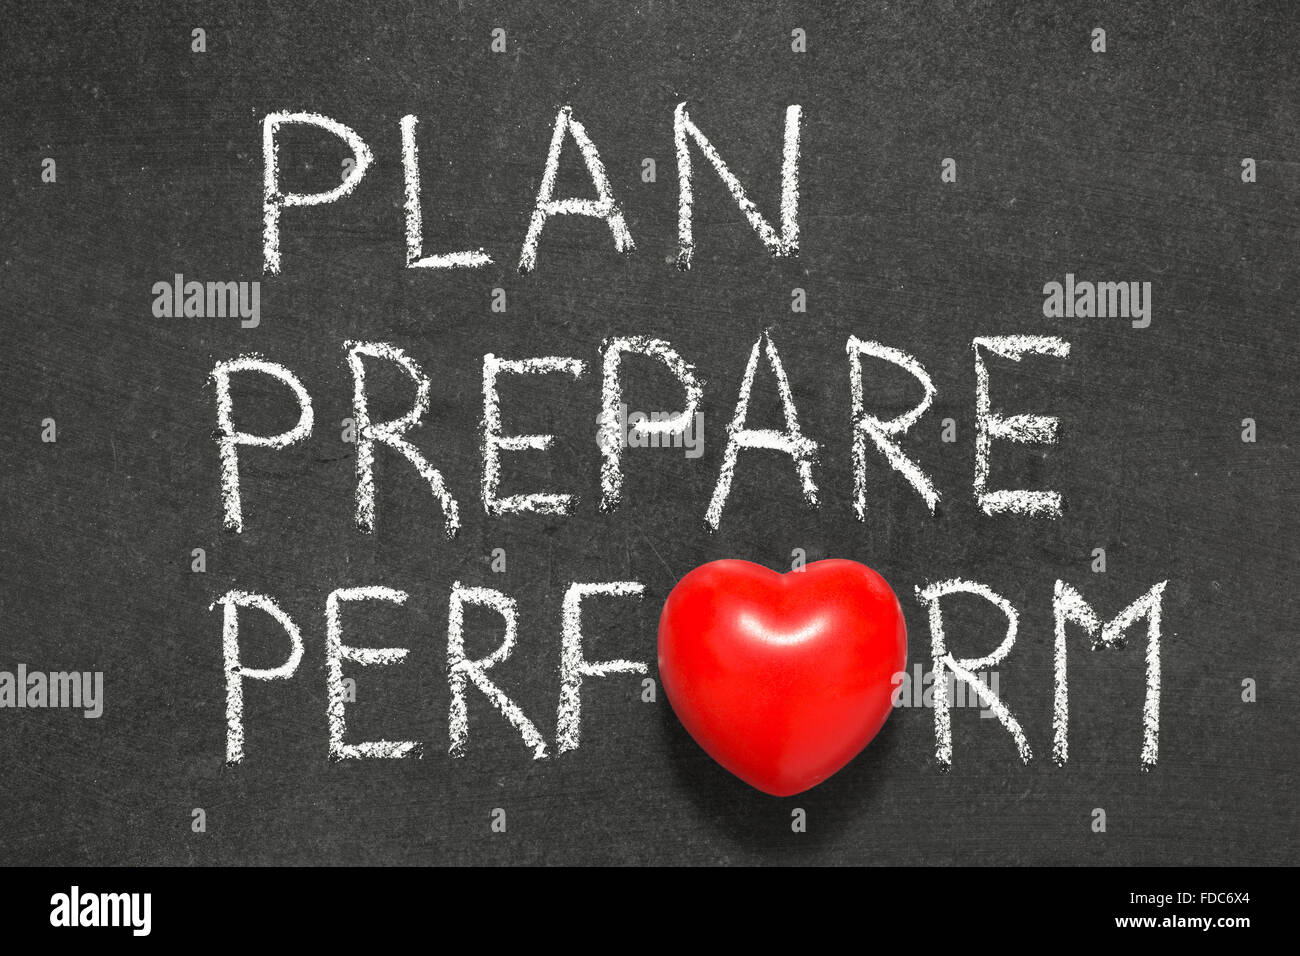 plan,prepare and perform phrase handwritten on blackboard with heart symbol instead O Stock Photo